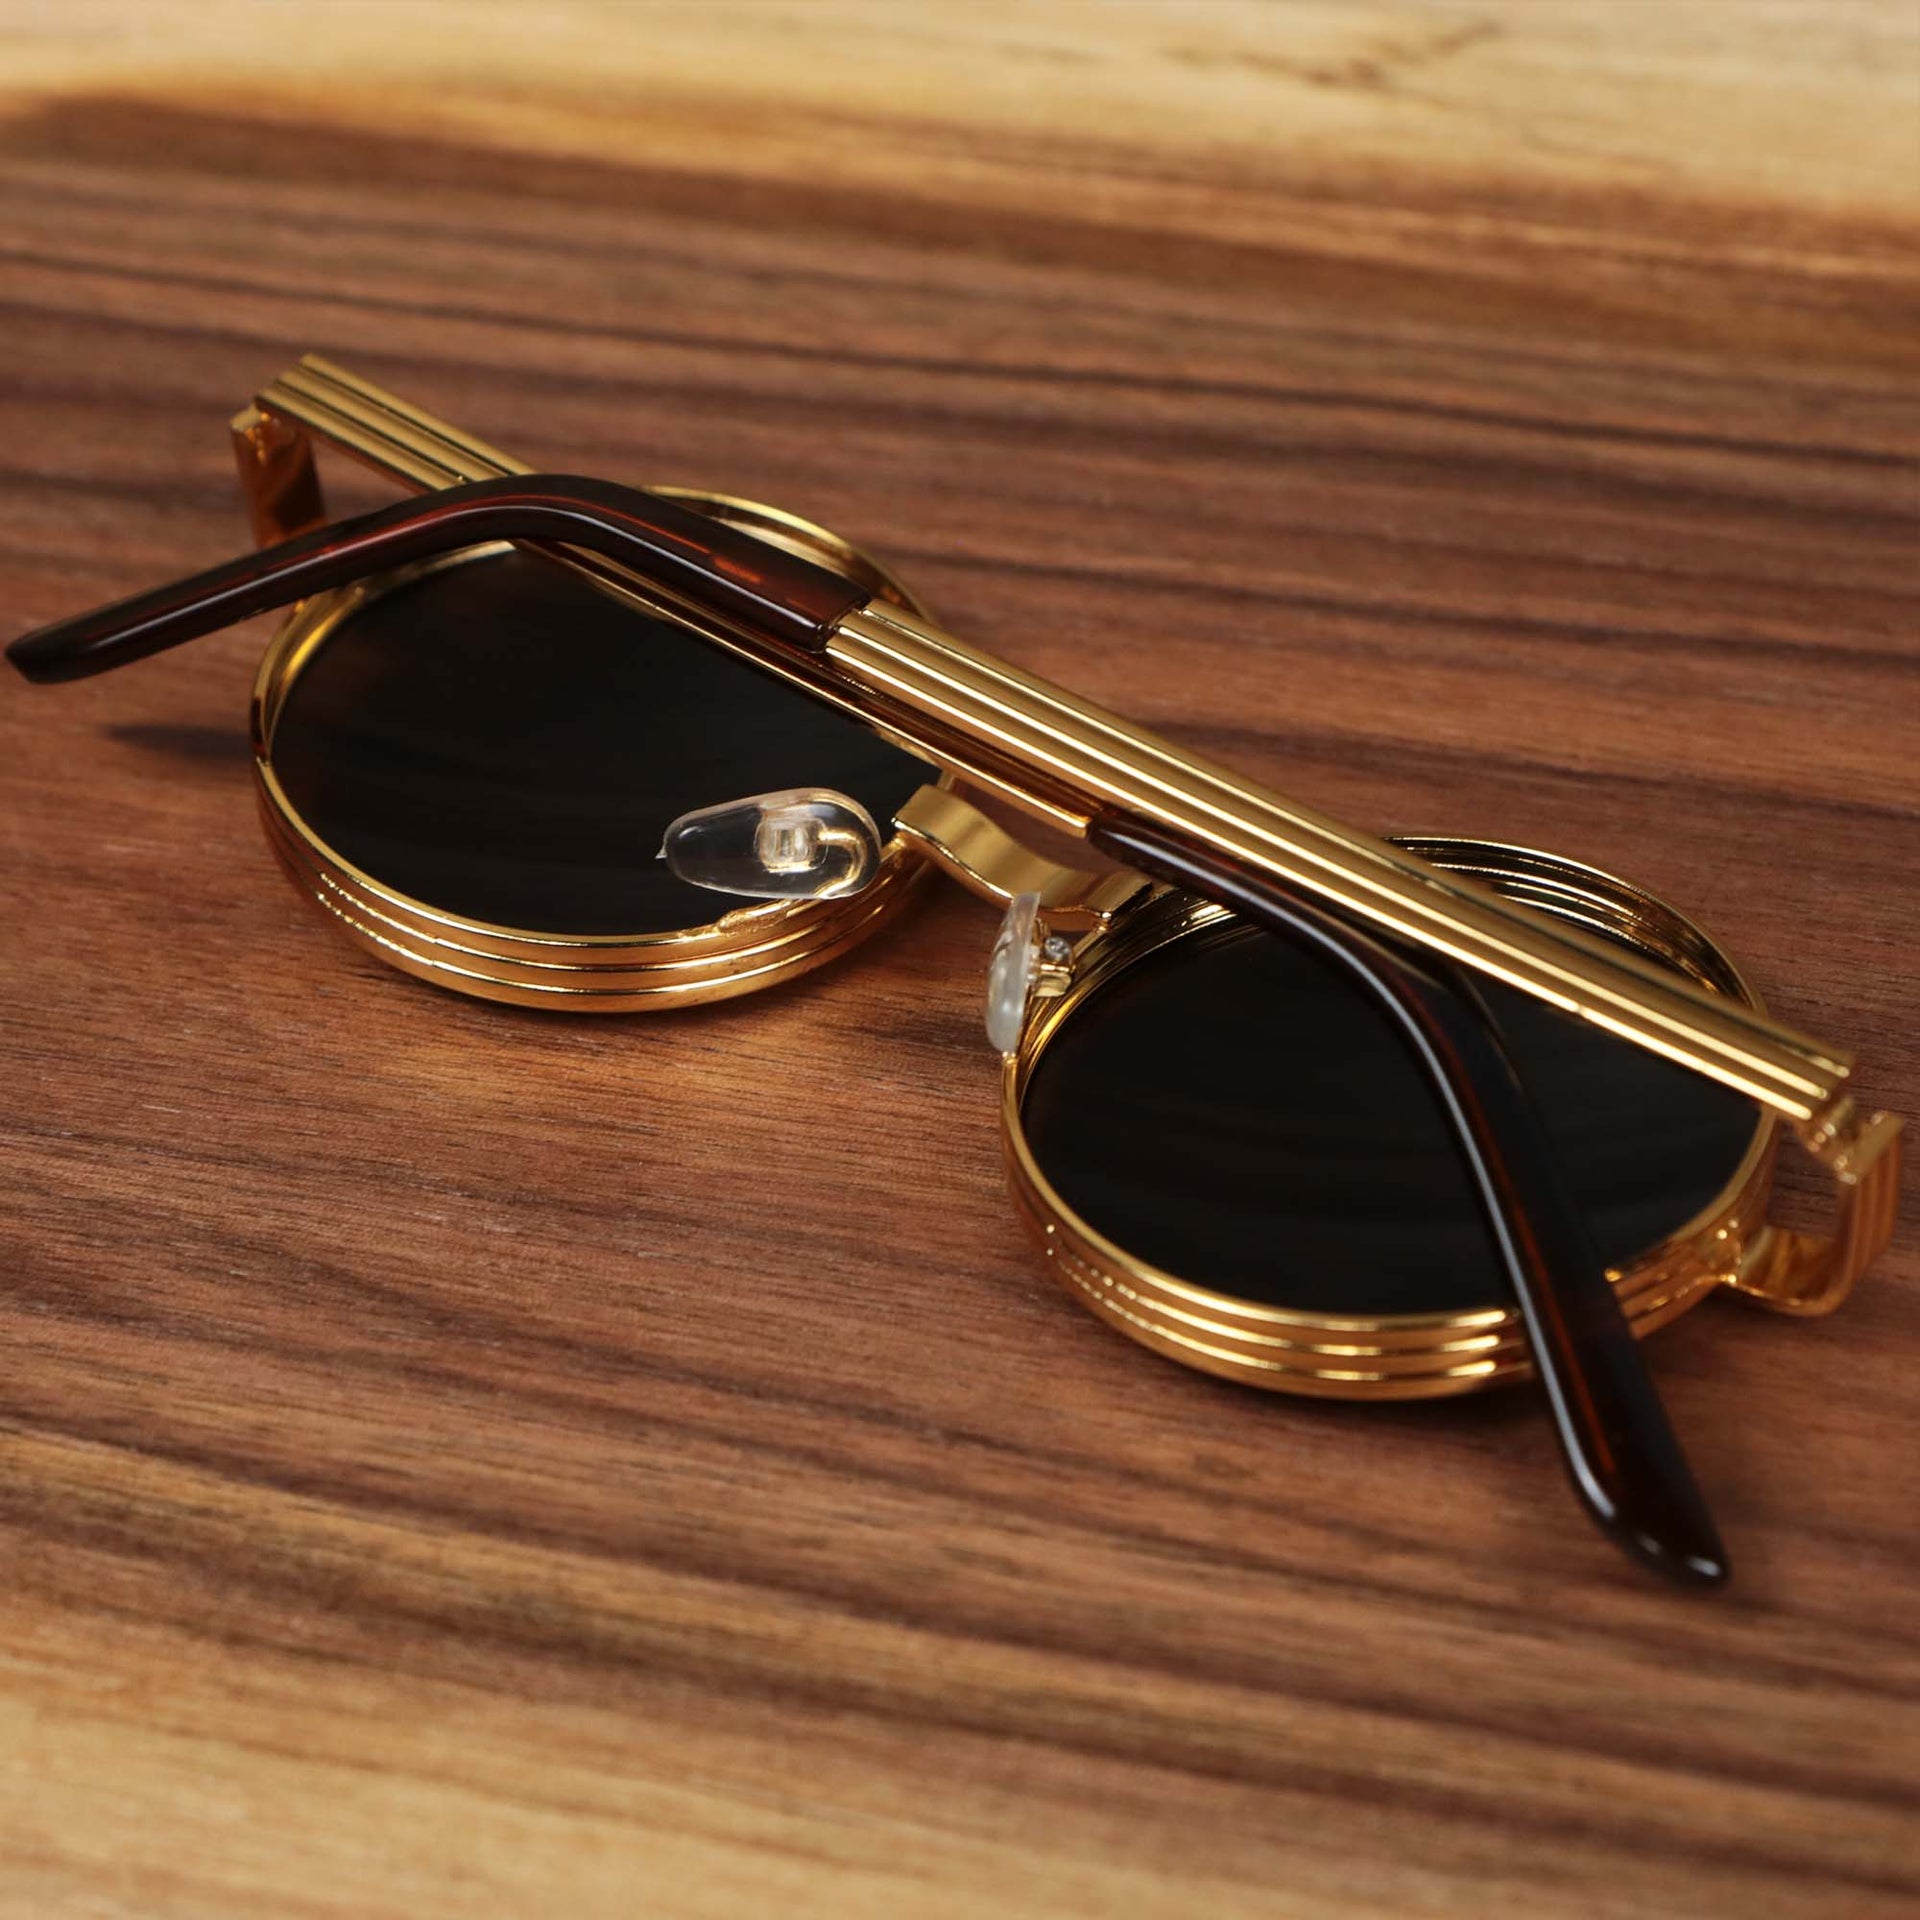 The Round 3 Row Frame Brown Lens Sunglasses with Gold Frame folded up